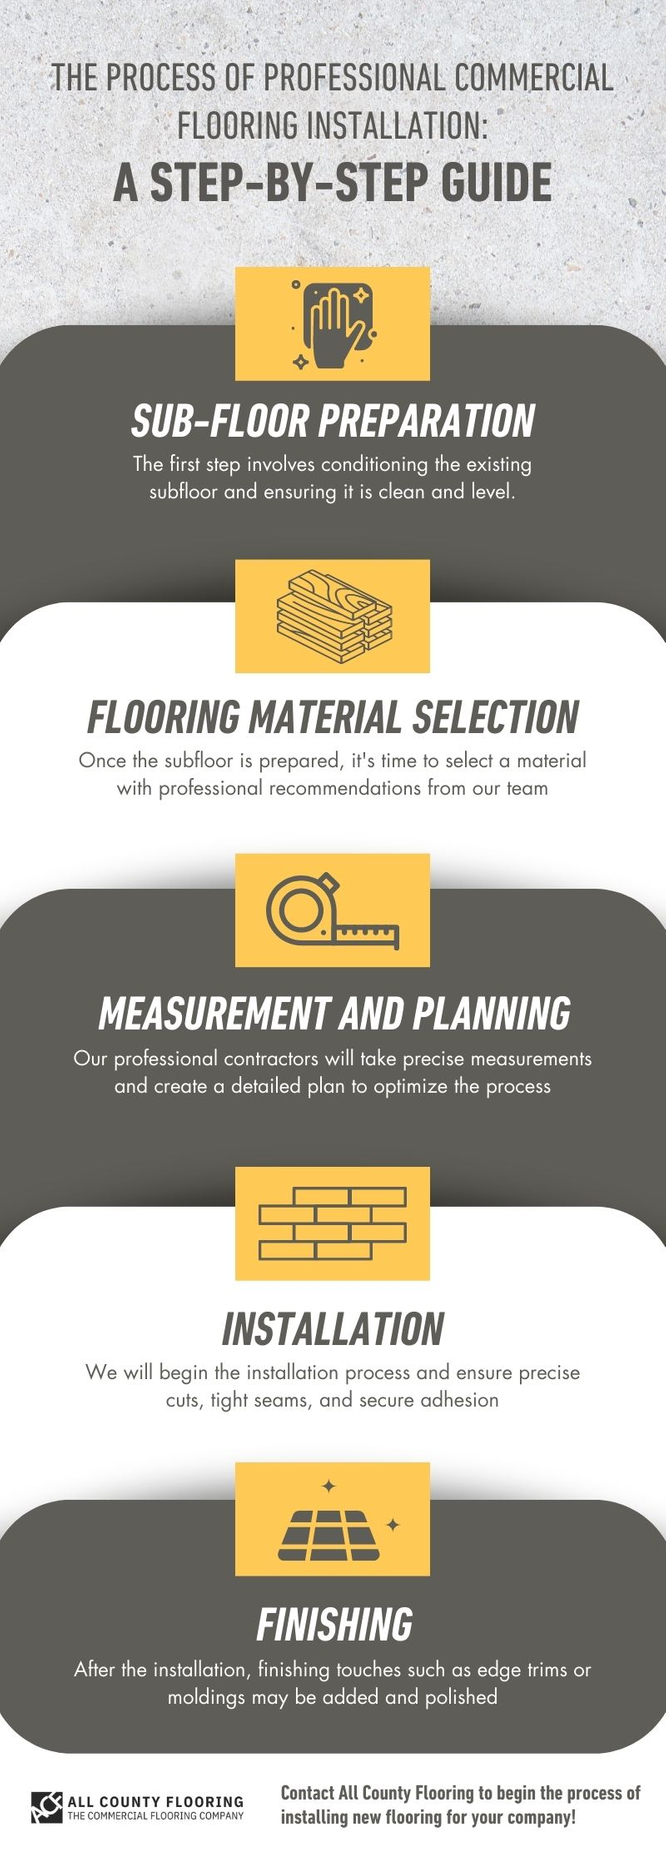 The Process of Professional Commercial Flooring Installation A Step-by-Step Guide infographic .jpg